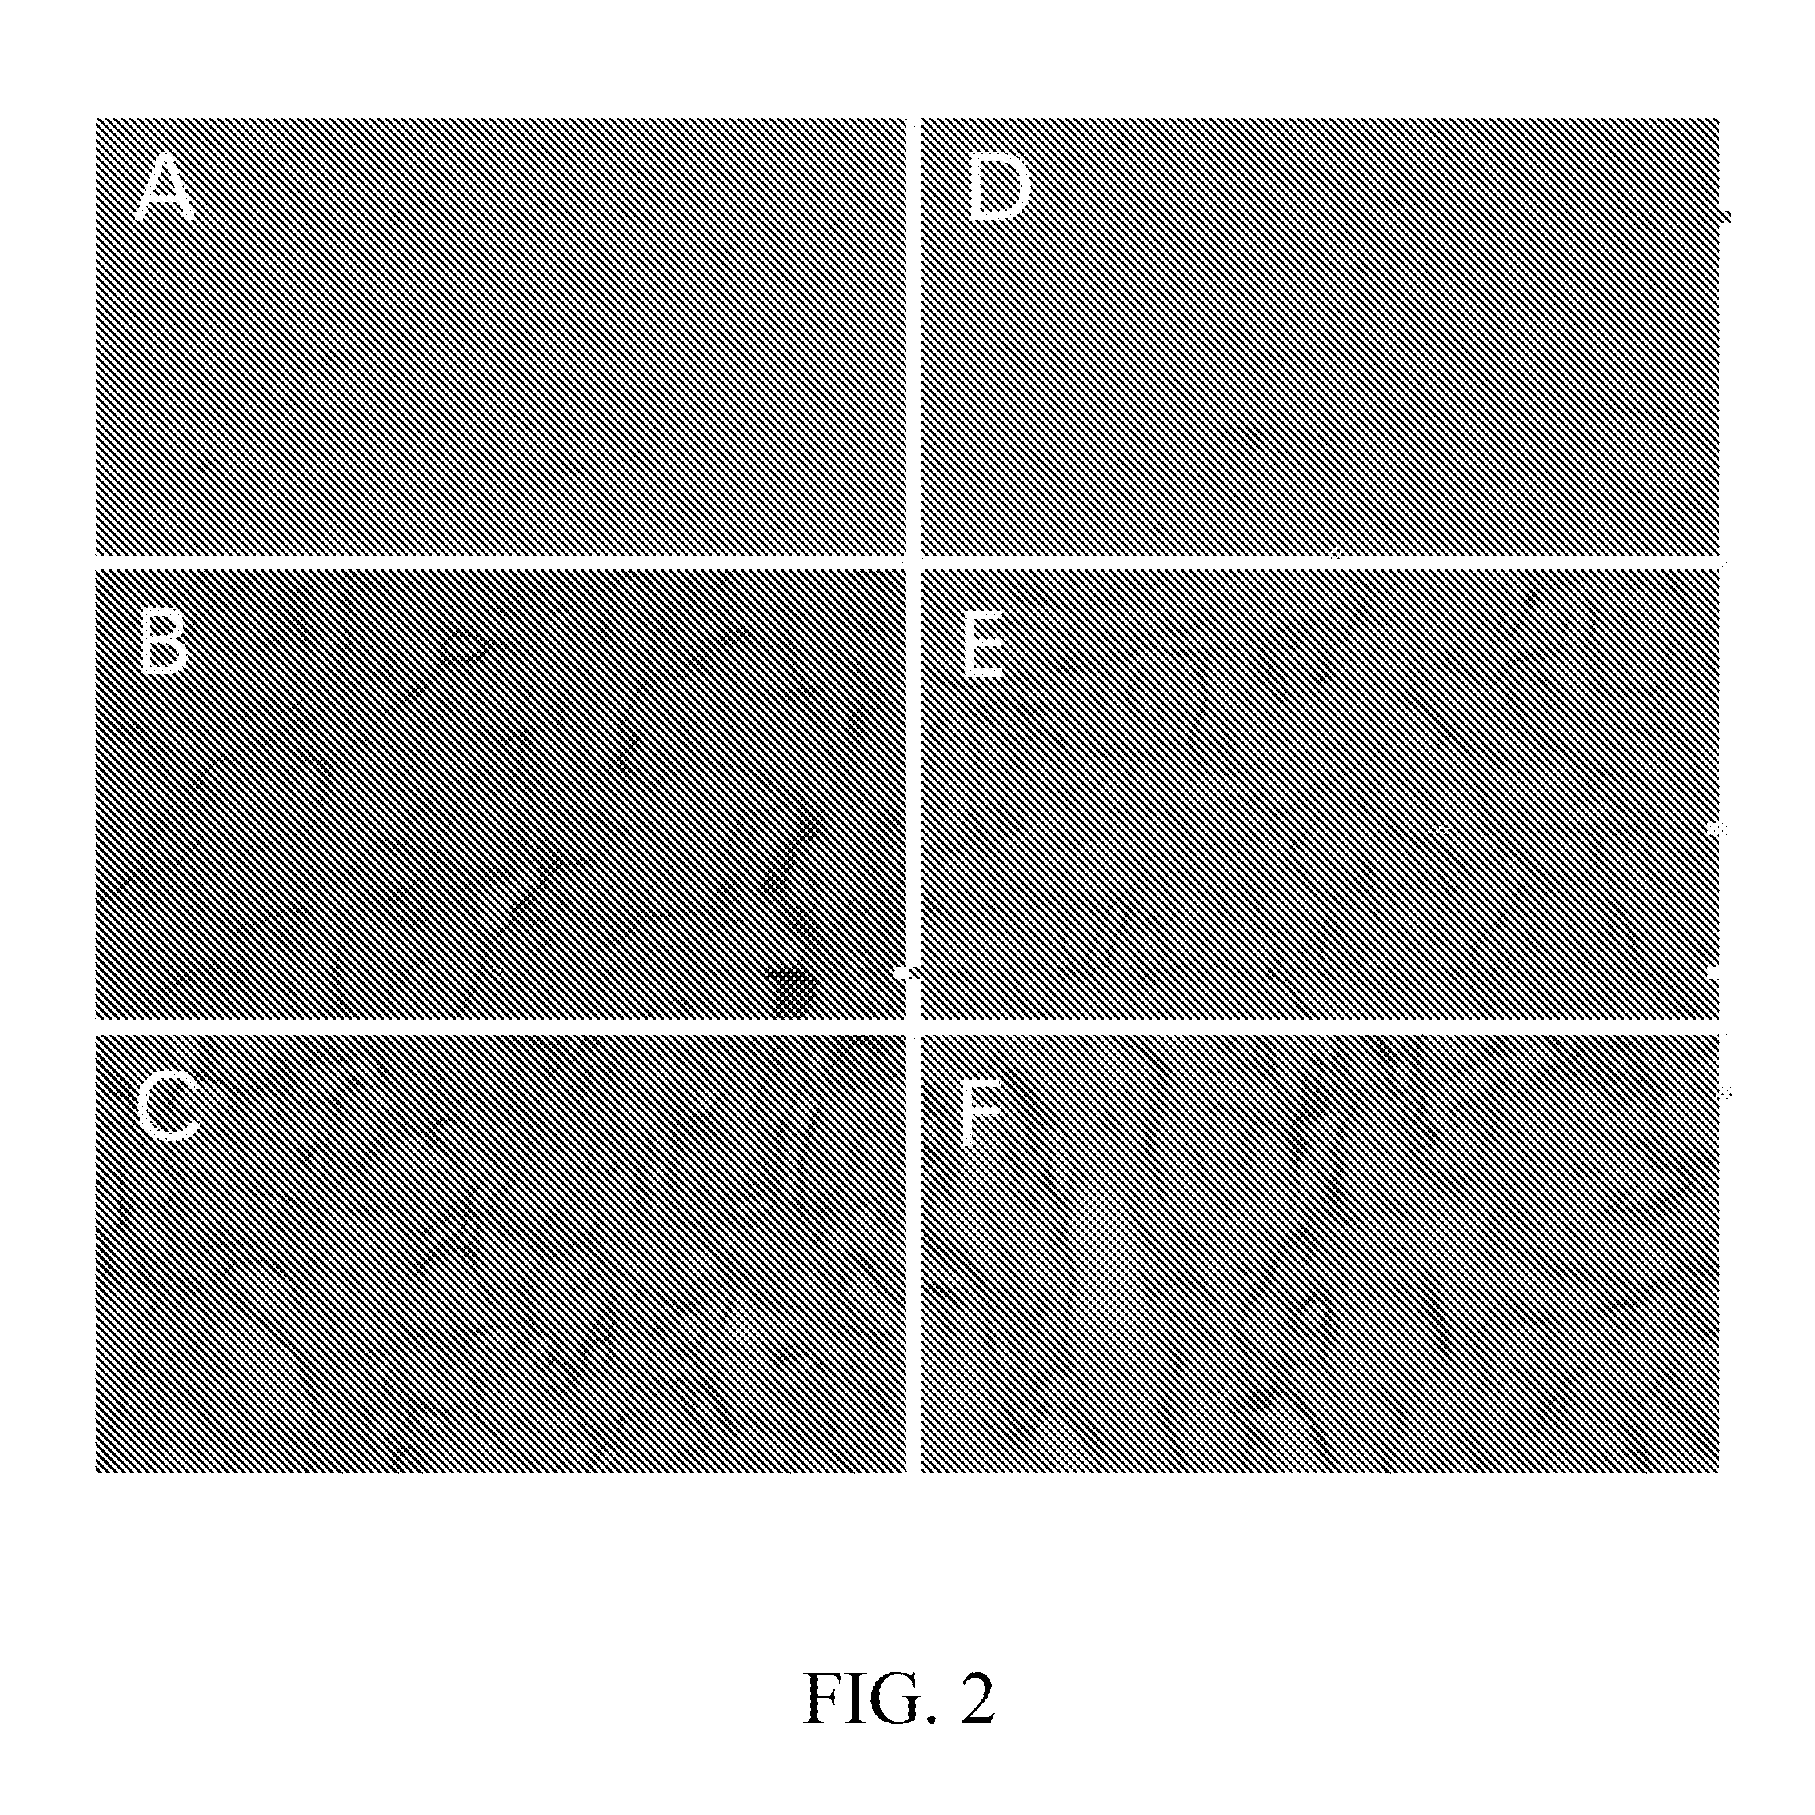 Method for preparing an animal decellularized tissue matrix material and a decellularized tissue matrix material prepared thereby